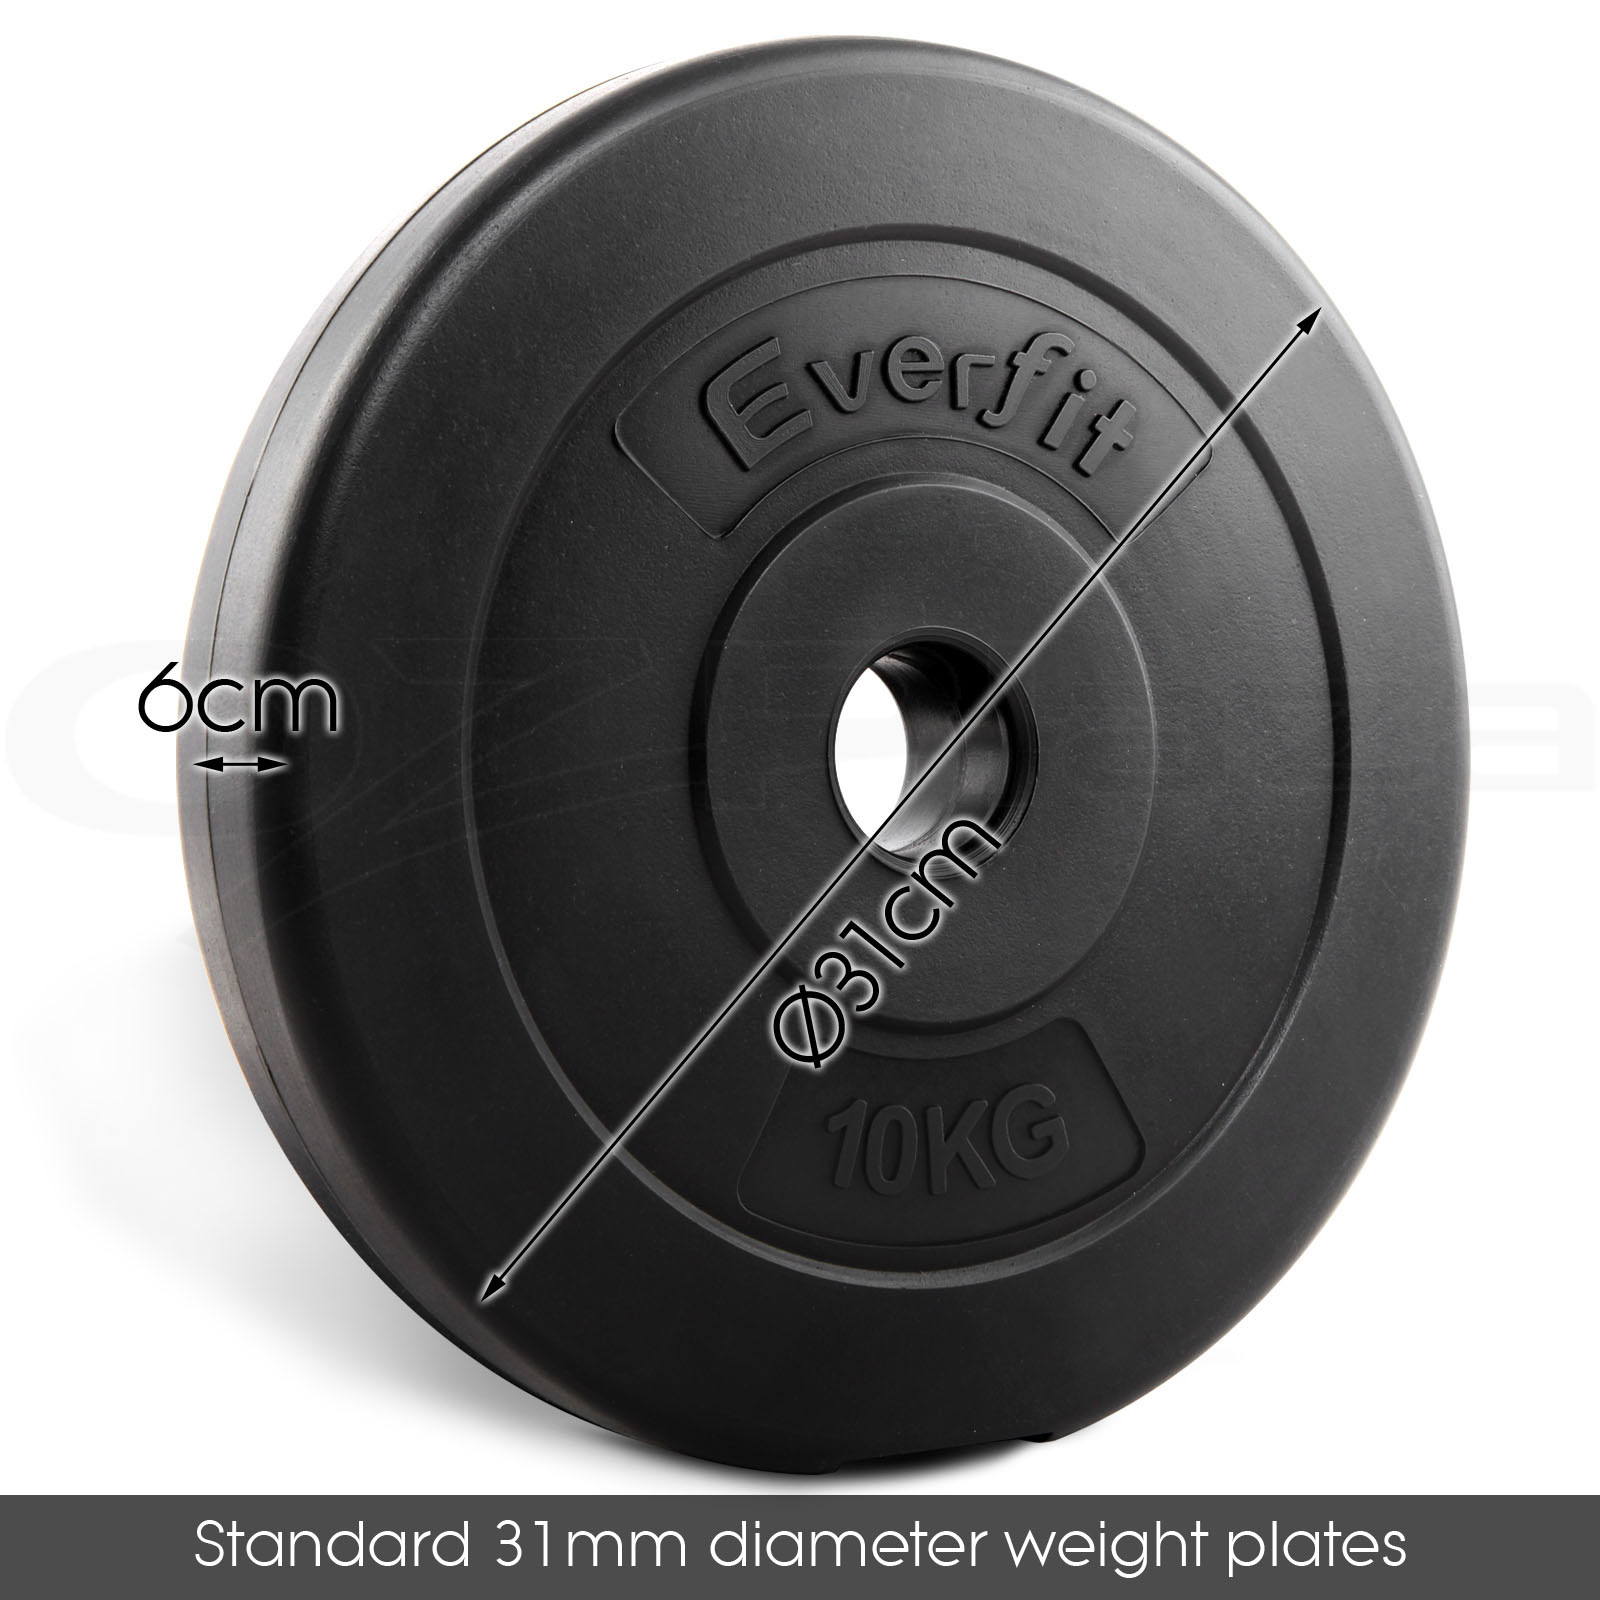 How much does a standard barbell weigh?